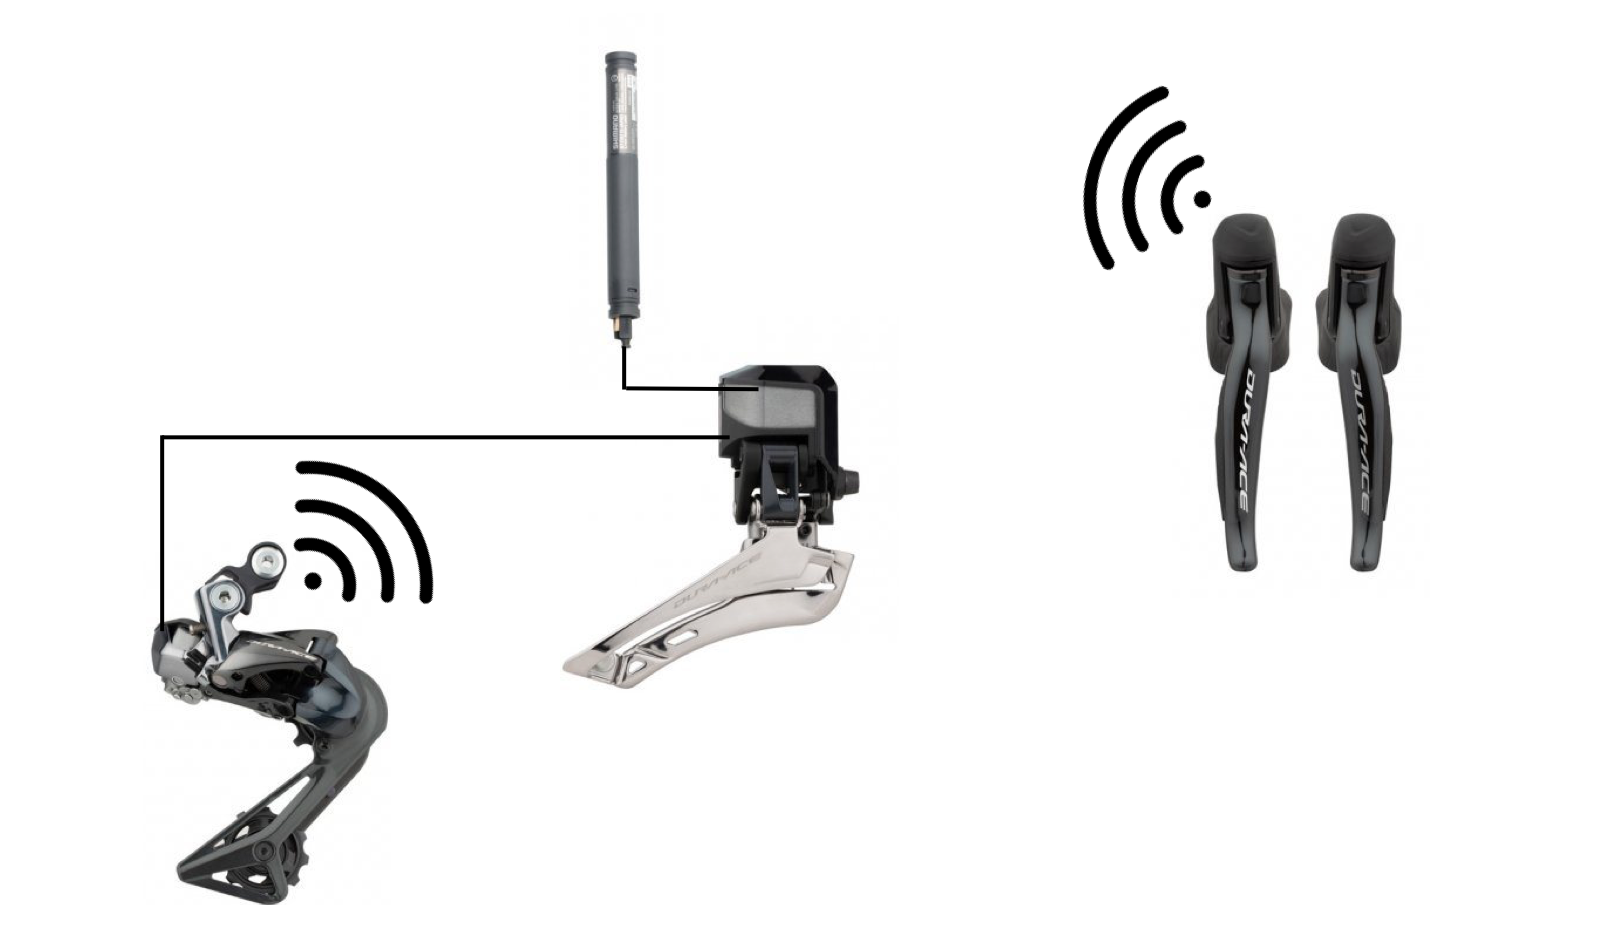 Shimano Wireless Di2 Systeem Layout (Hypothese)